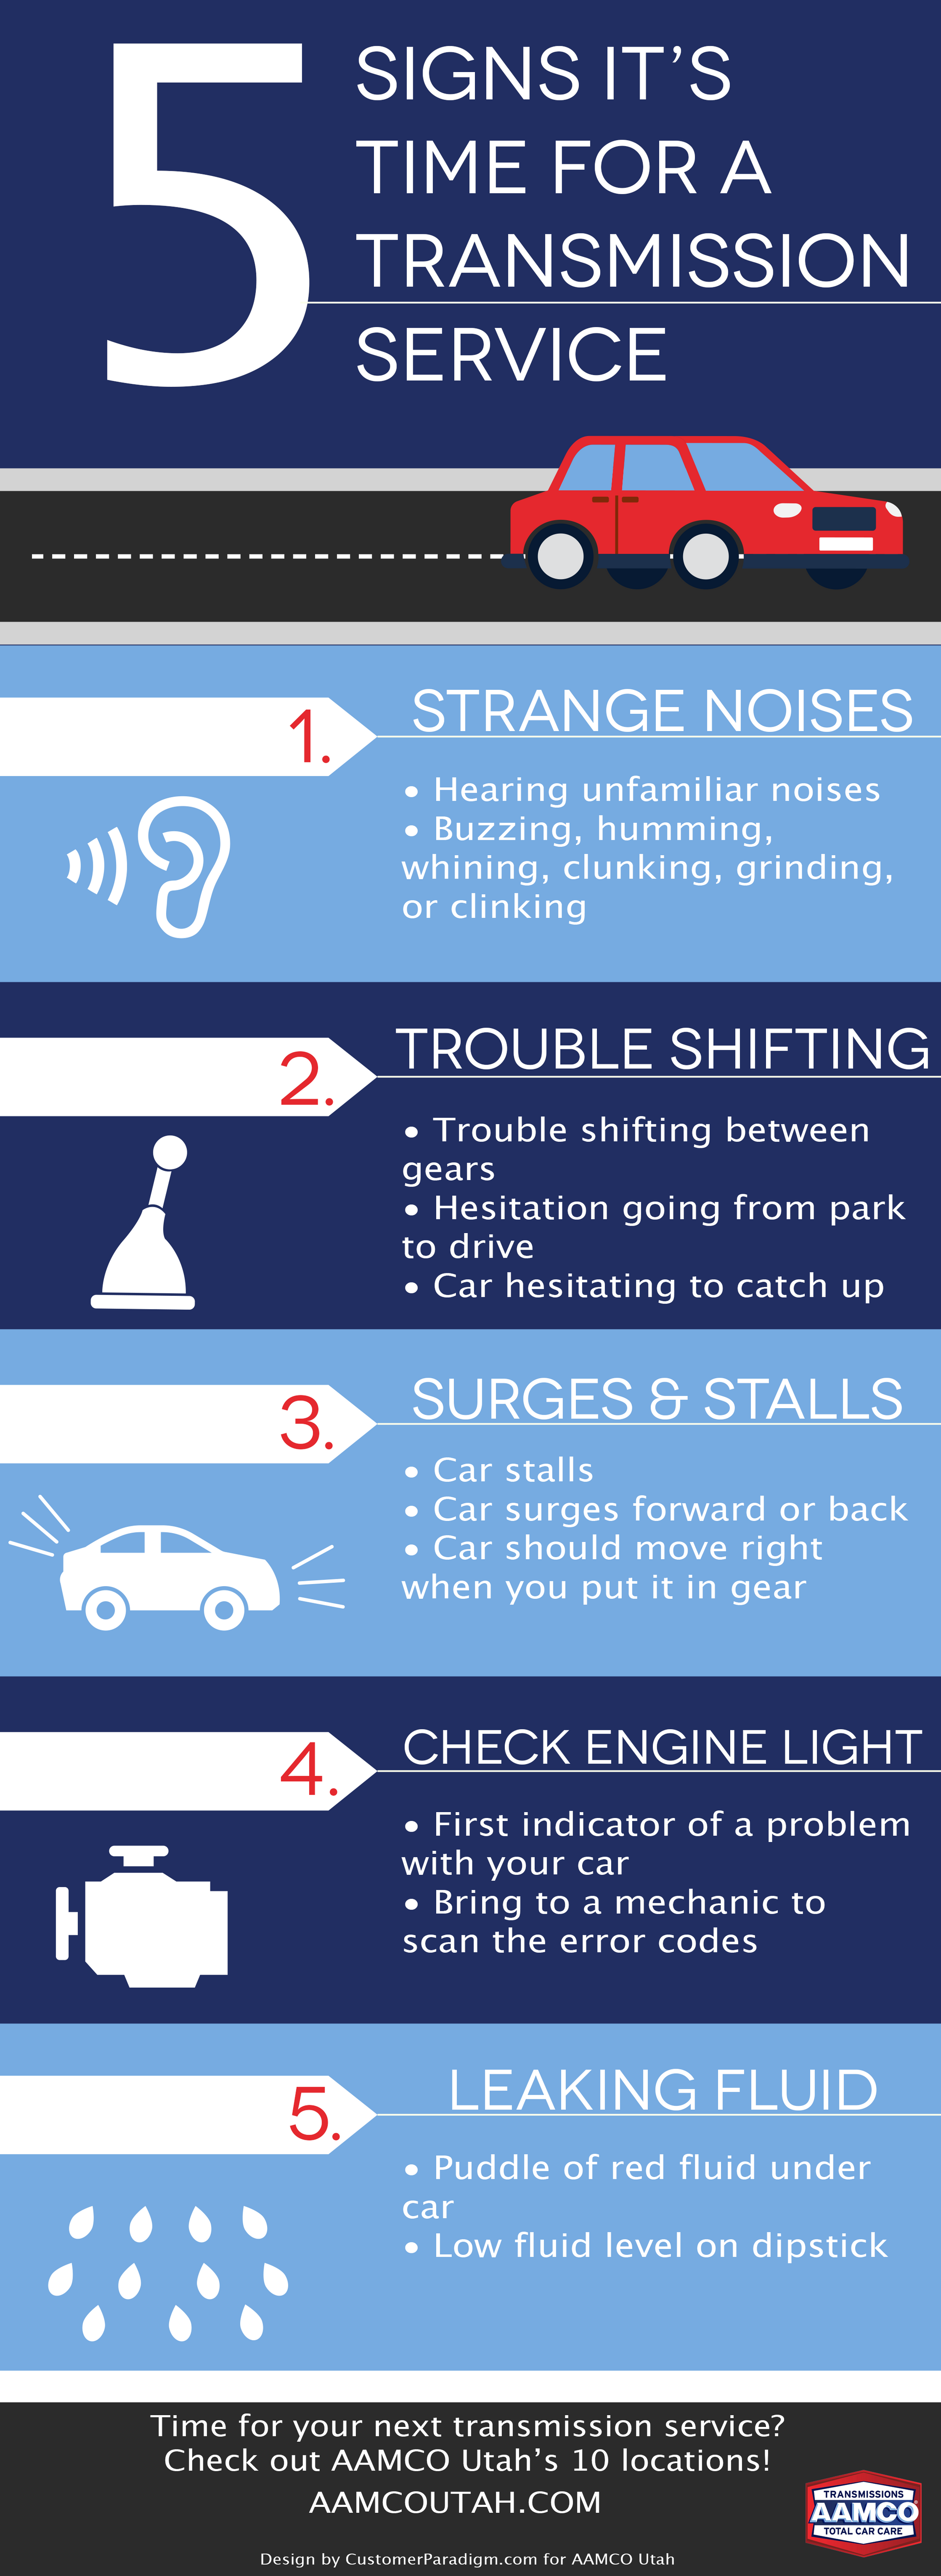 A poster showing the signs it 's time for a transmission service